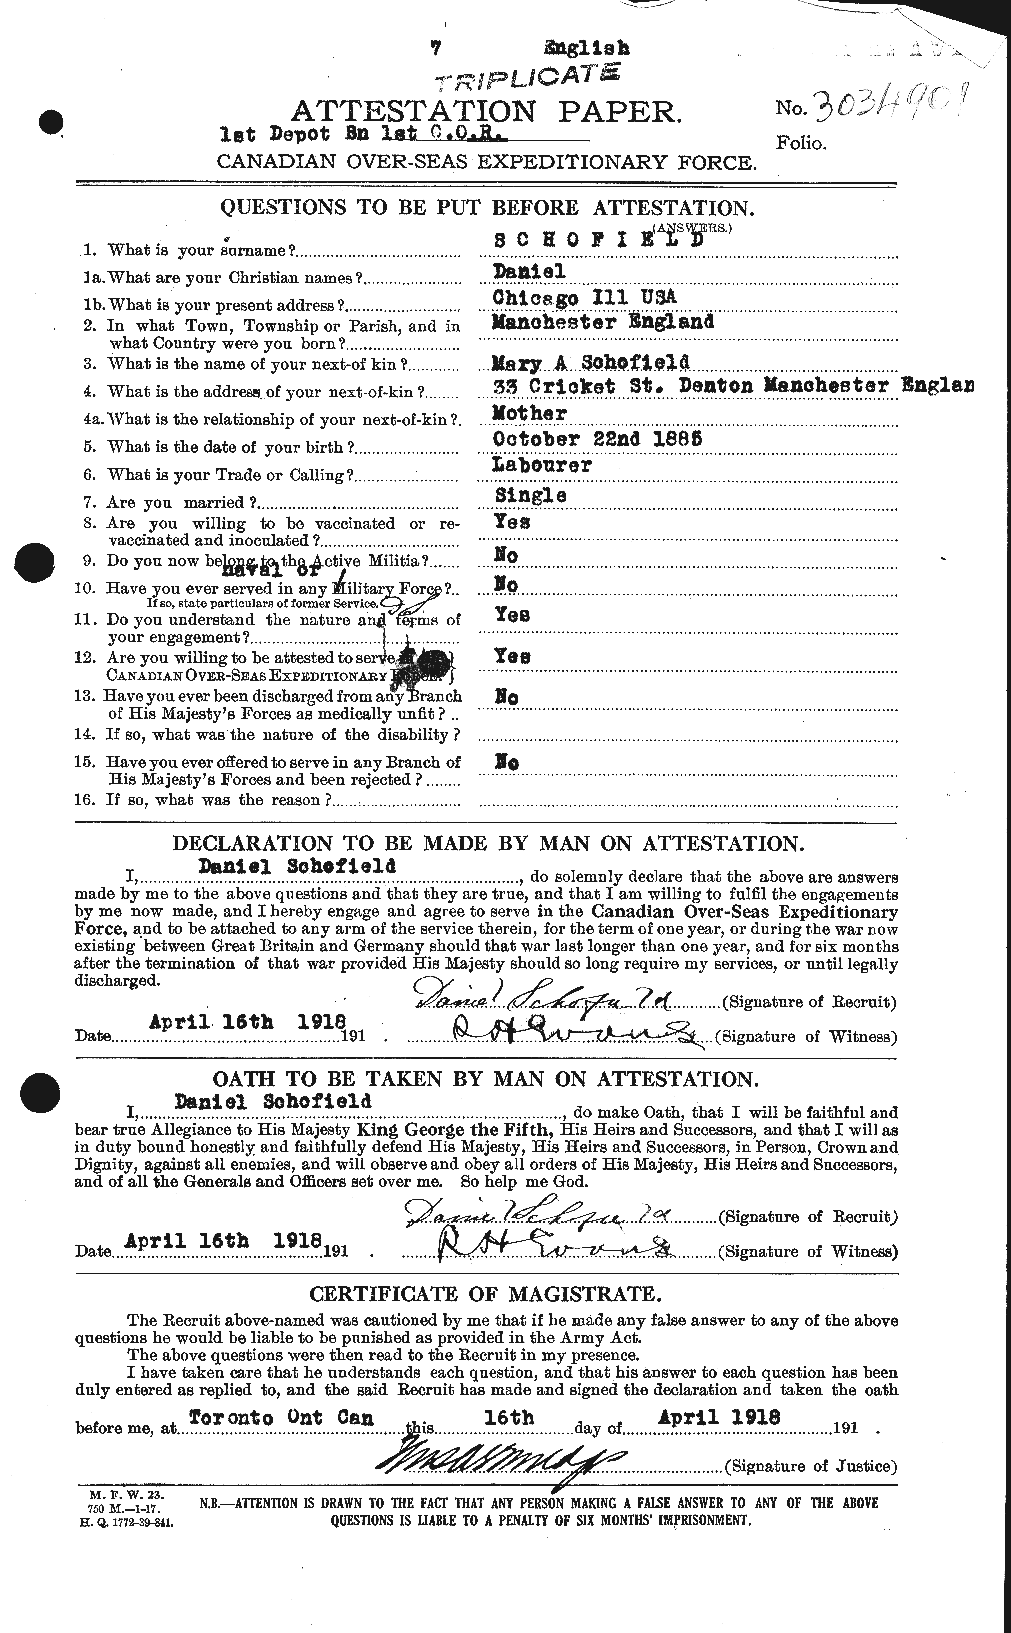 Personnel Records of the First World War - CEF 082212a